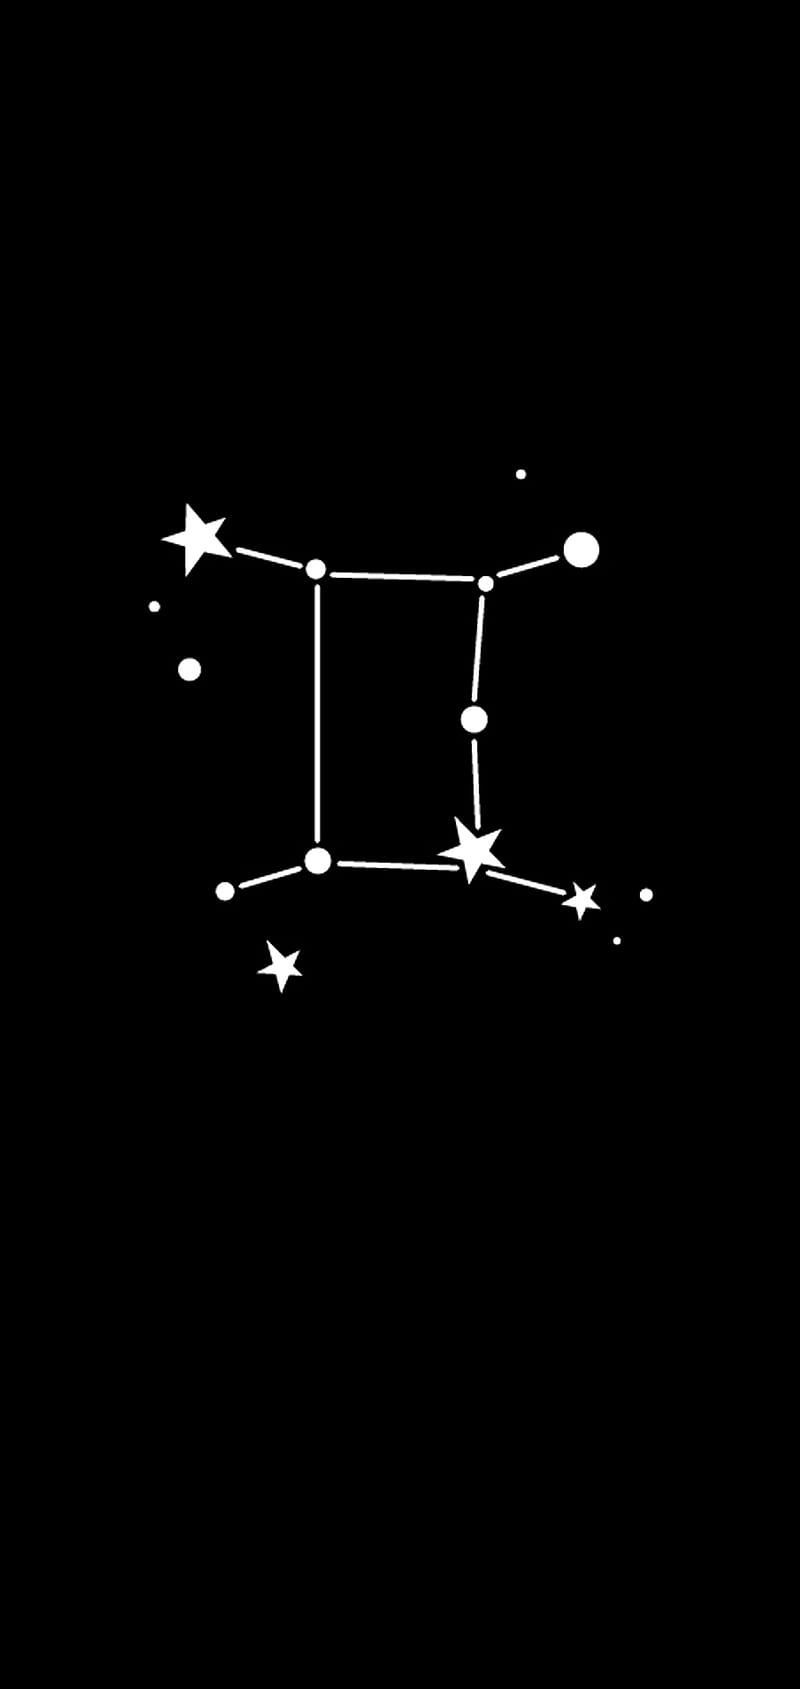 The constellation of libra in black and white - Gemini